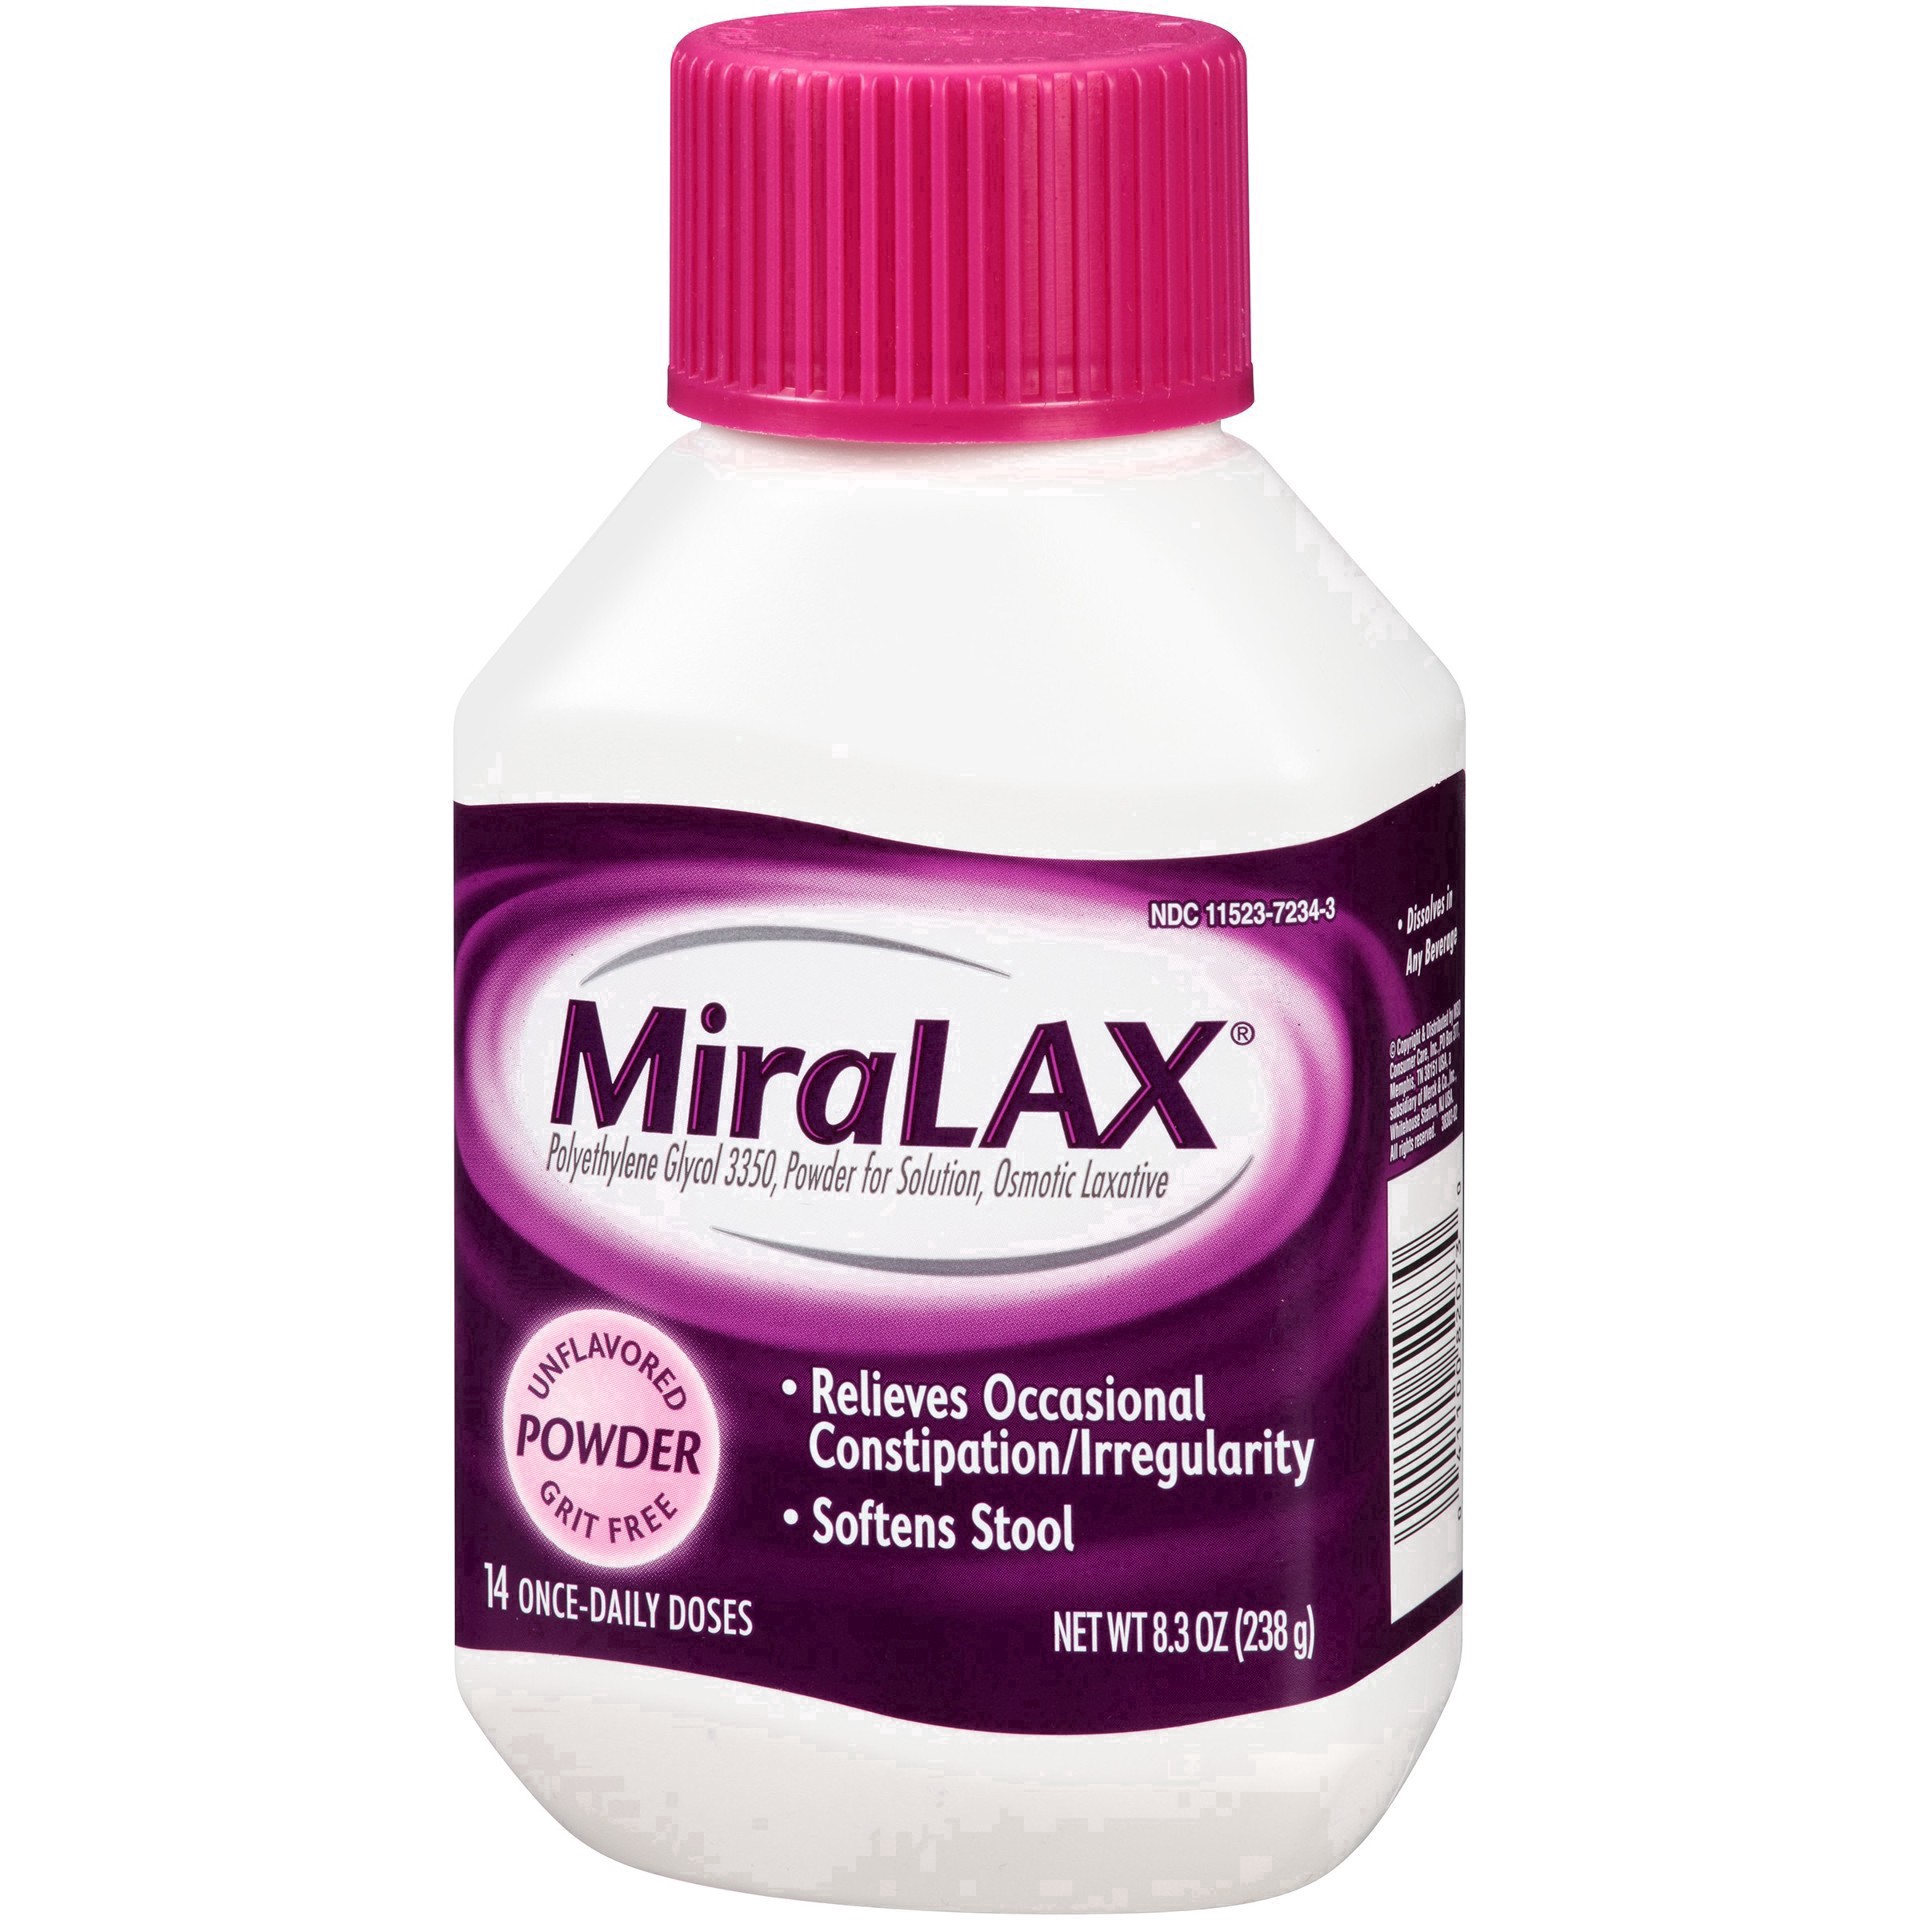 slide 24 of 37, Miralax Powder Osmotic Unflavored Laxative 8.3 oz Bottle, 